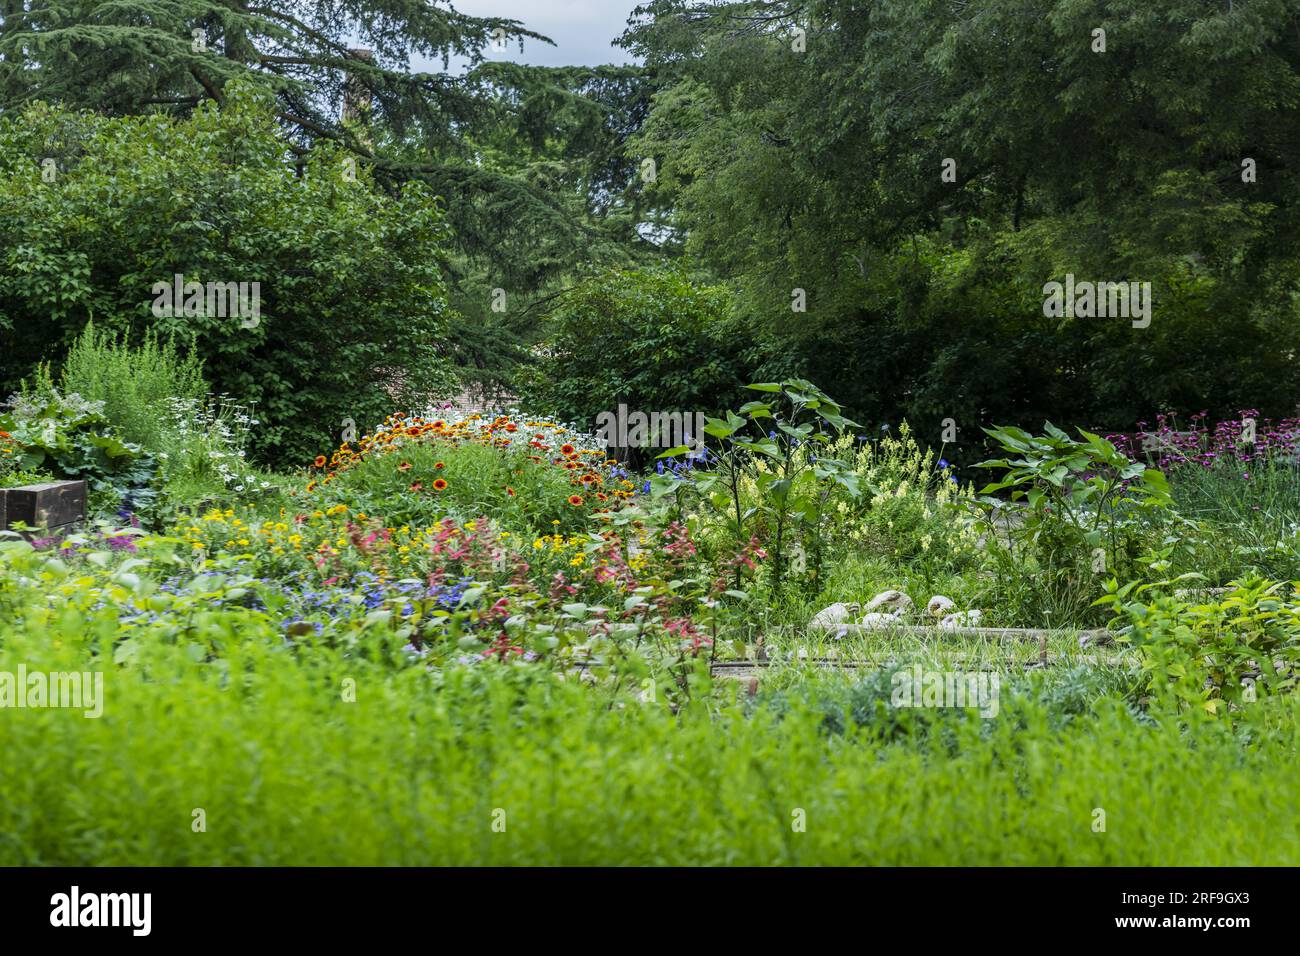 A large group of flowers of various colors and types with green leaves in an urban garden Stock Photo